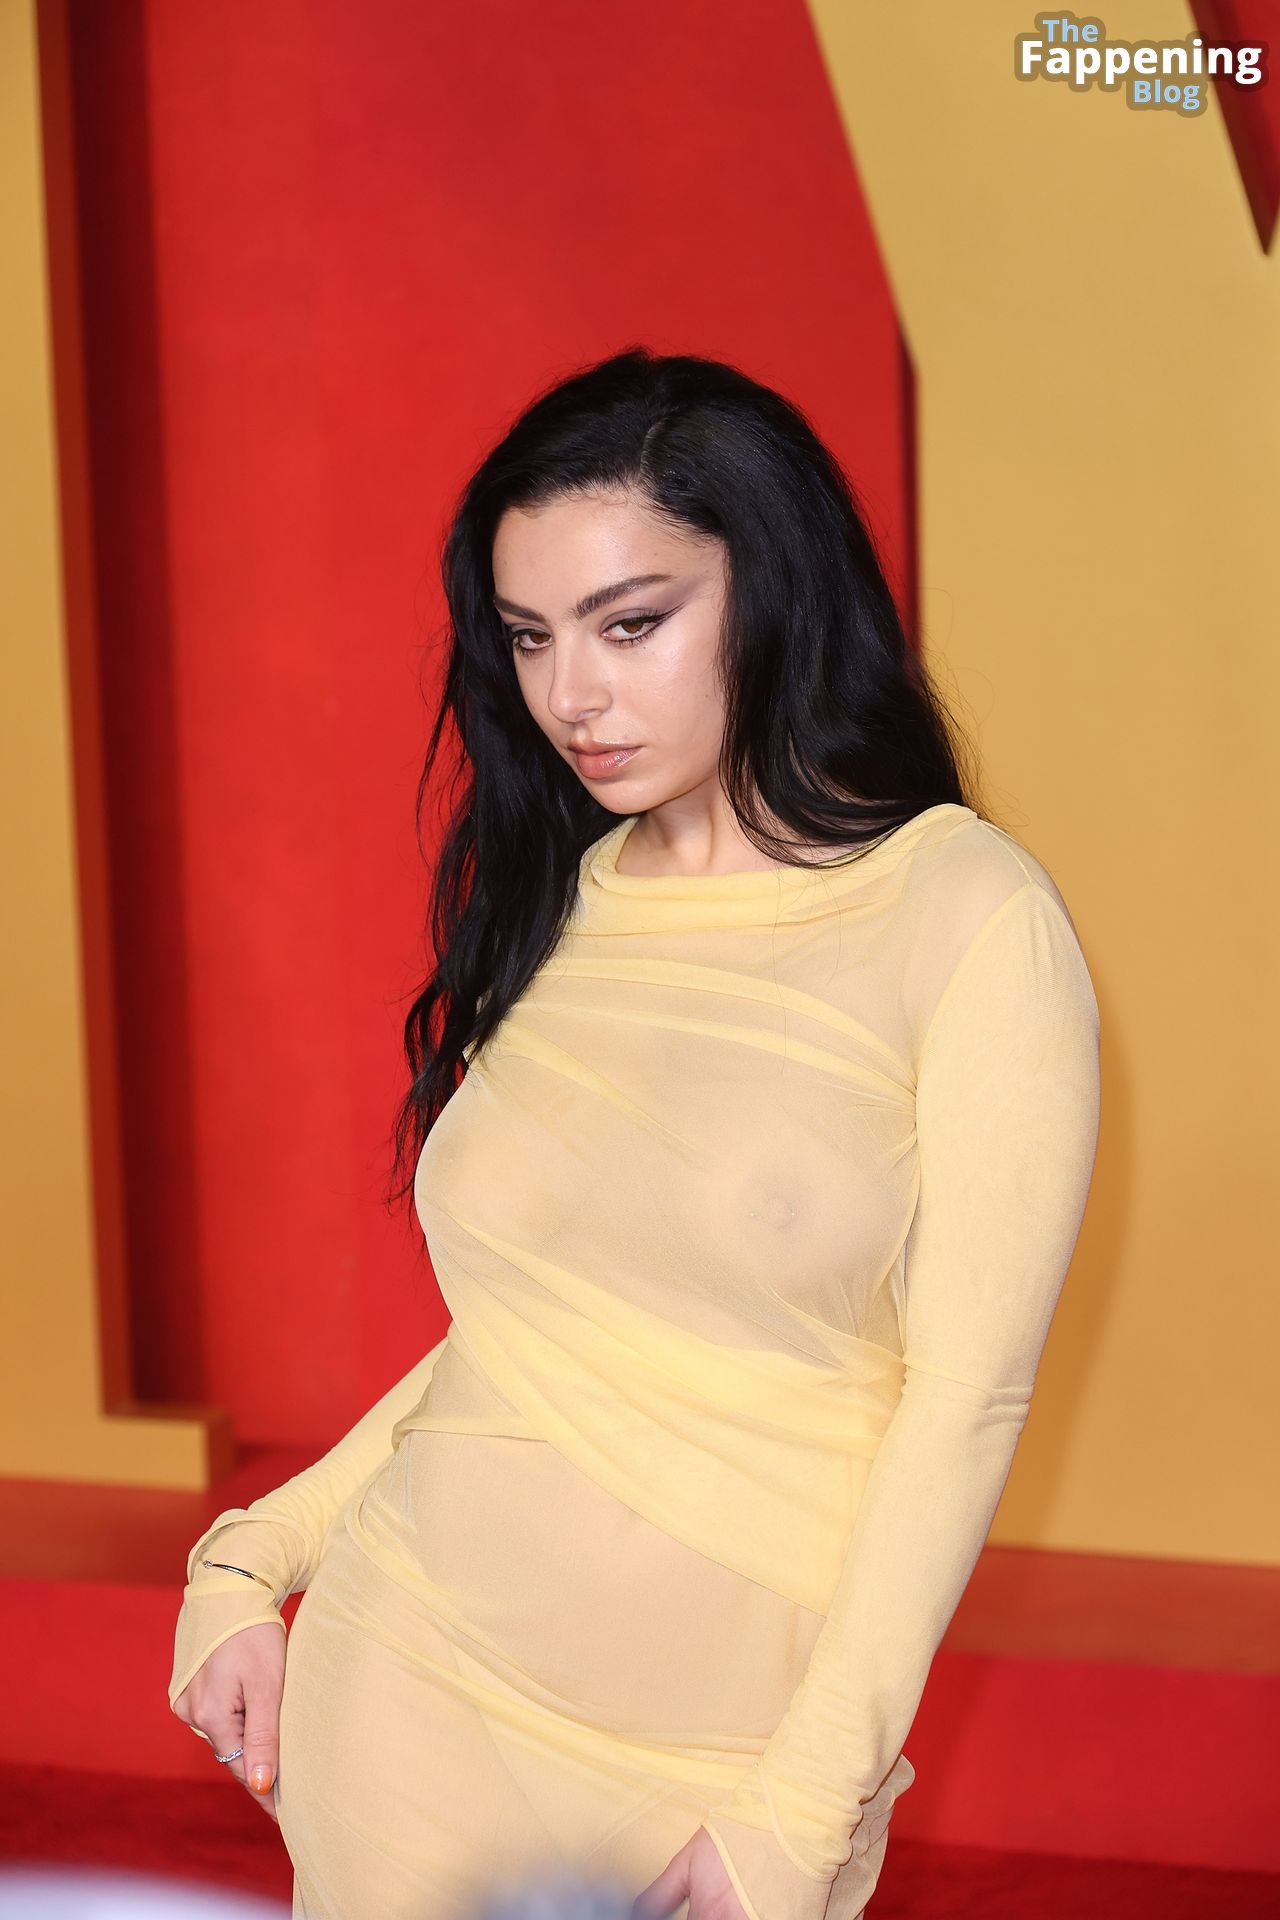 Charli-XCX-Nude-Sexy-1-The-Fappening-Blog.jpg